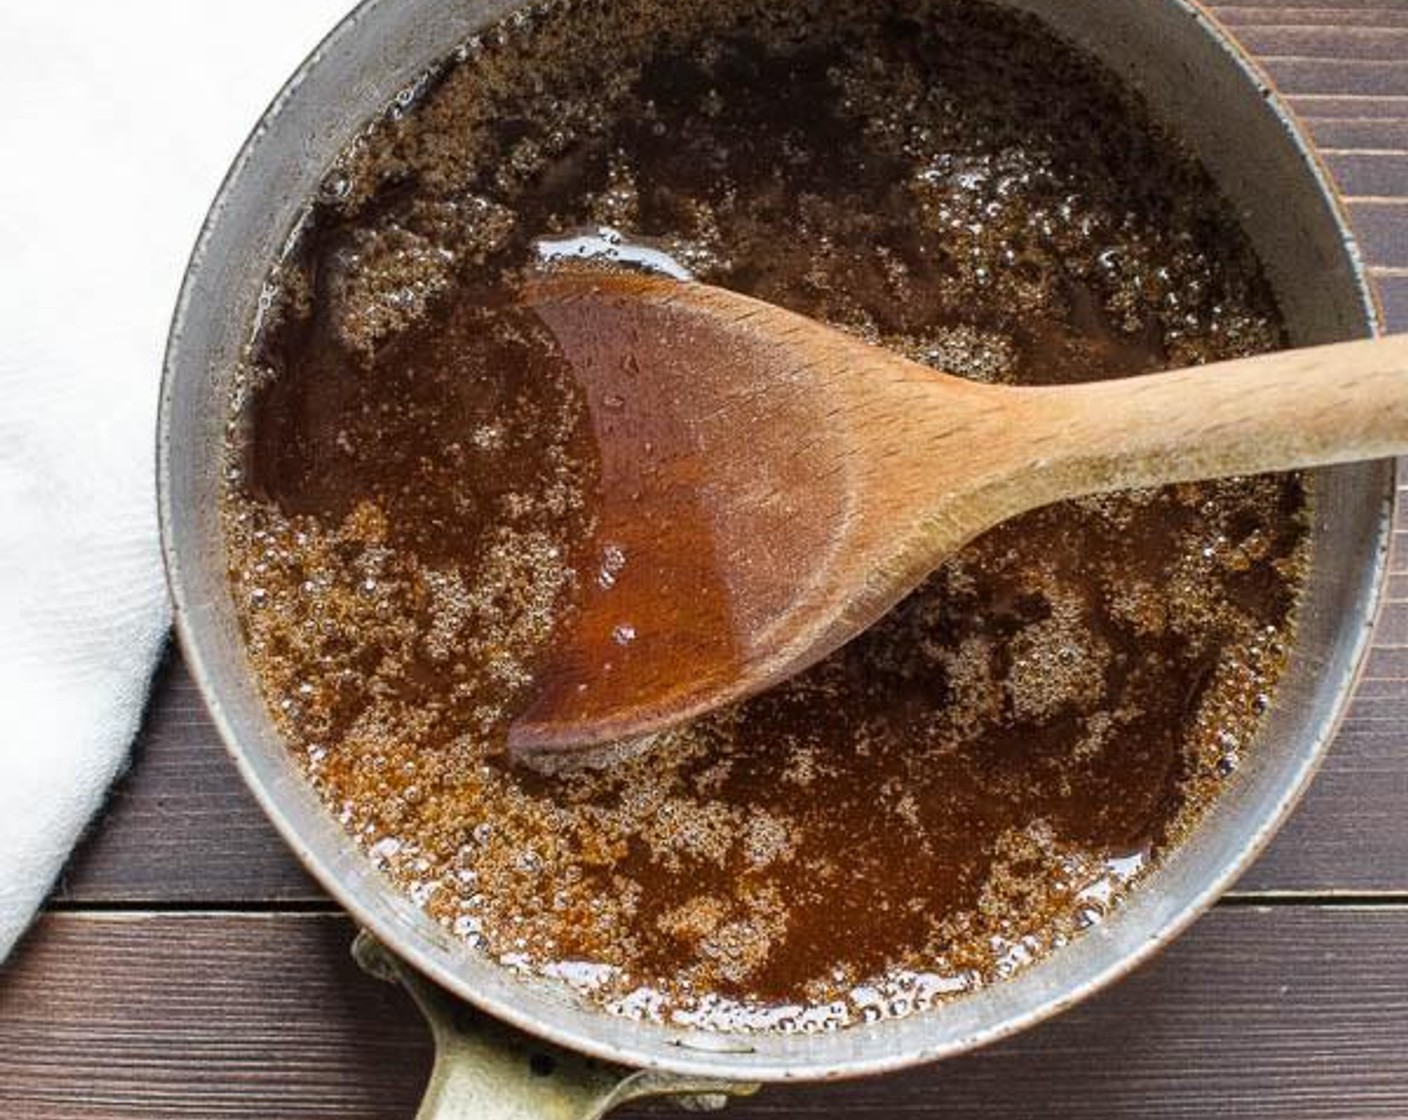 step 3 In a small saucepan, add the Brown Sugar (1/2 cup), Pure Maple Syrup (1/2 cup), Canola Oil (1/3 cup), Ground Cinnamon (1 tsp), and Salt (1/4 tsp). Heat over medium high heat, stirring constantly until brown sugar dissolves (do not boil).